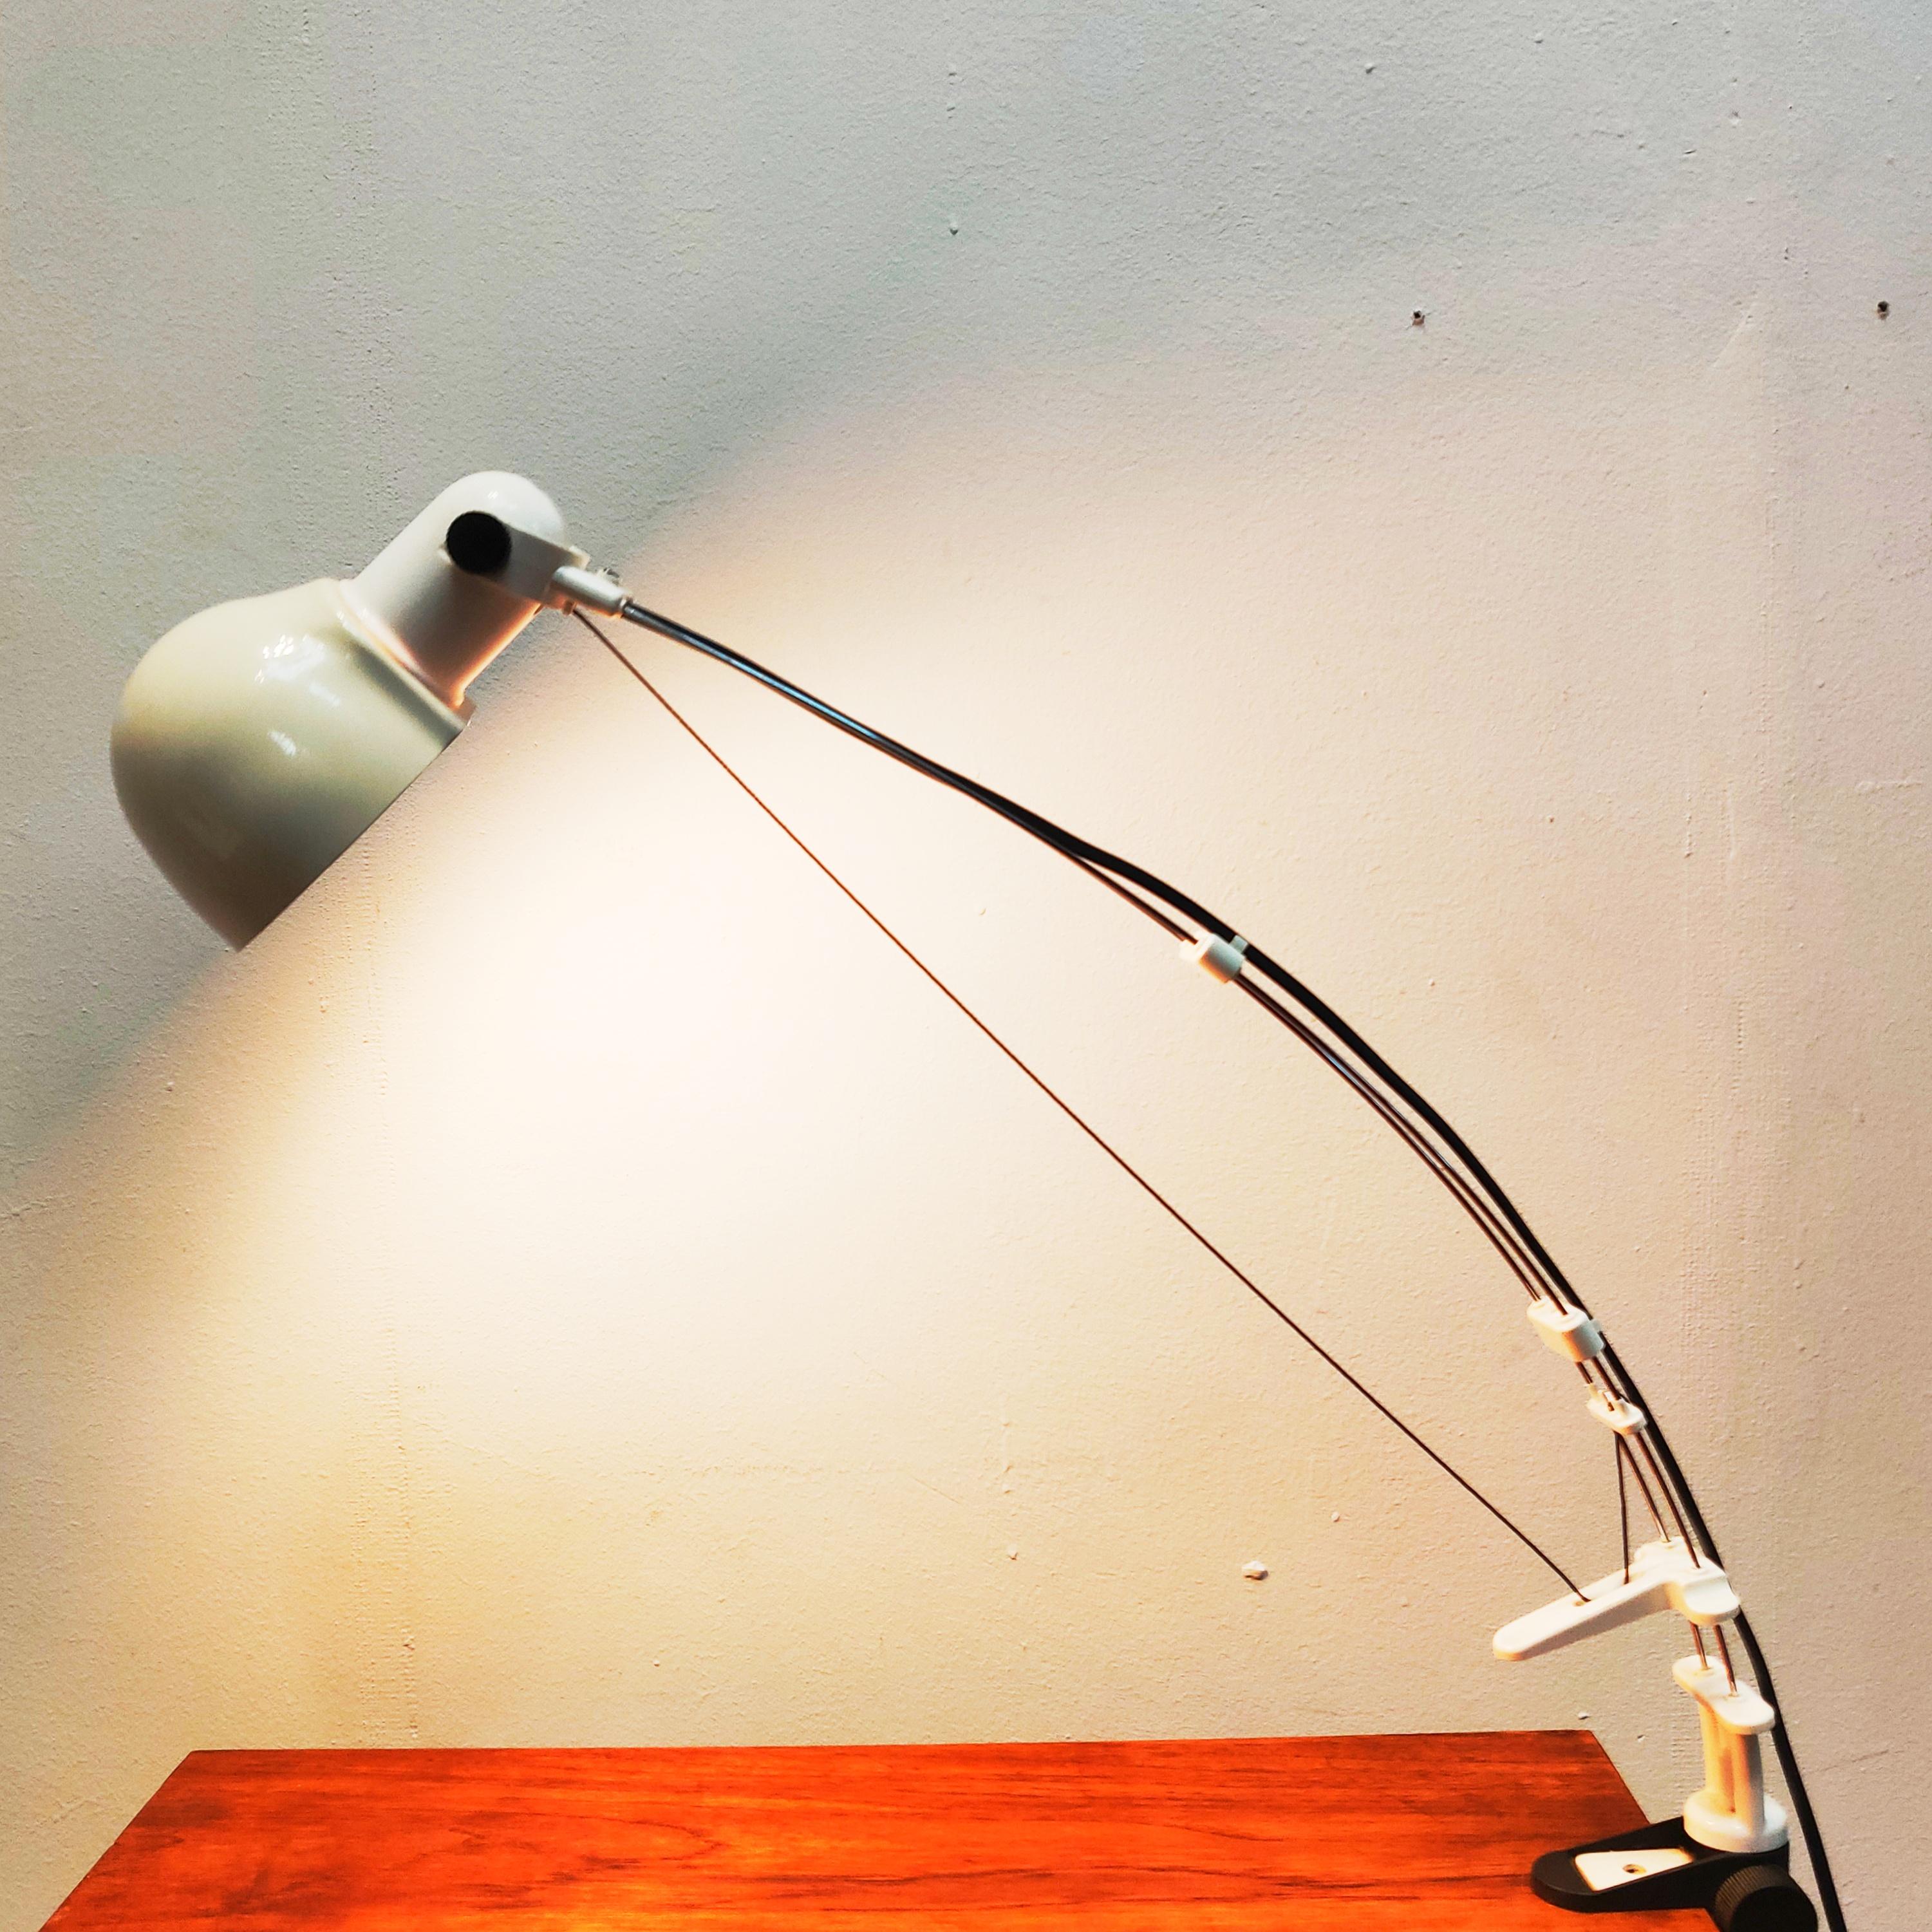 Flex Wire desk clamp lamp, 1970s.
Characteristic sculptural desk lamp which is adjustable in height by pulling or stretching the wire, the shade is adjustable and the lamp can rotate. The lamp has a clamp mounting to clamp it on the table or